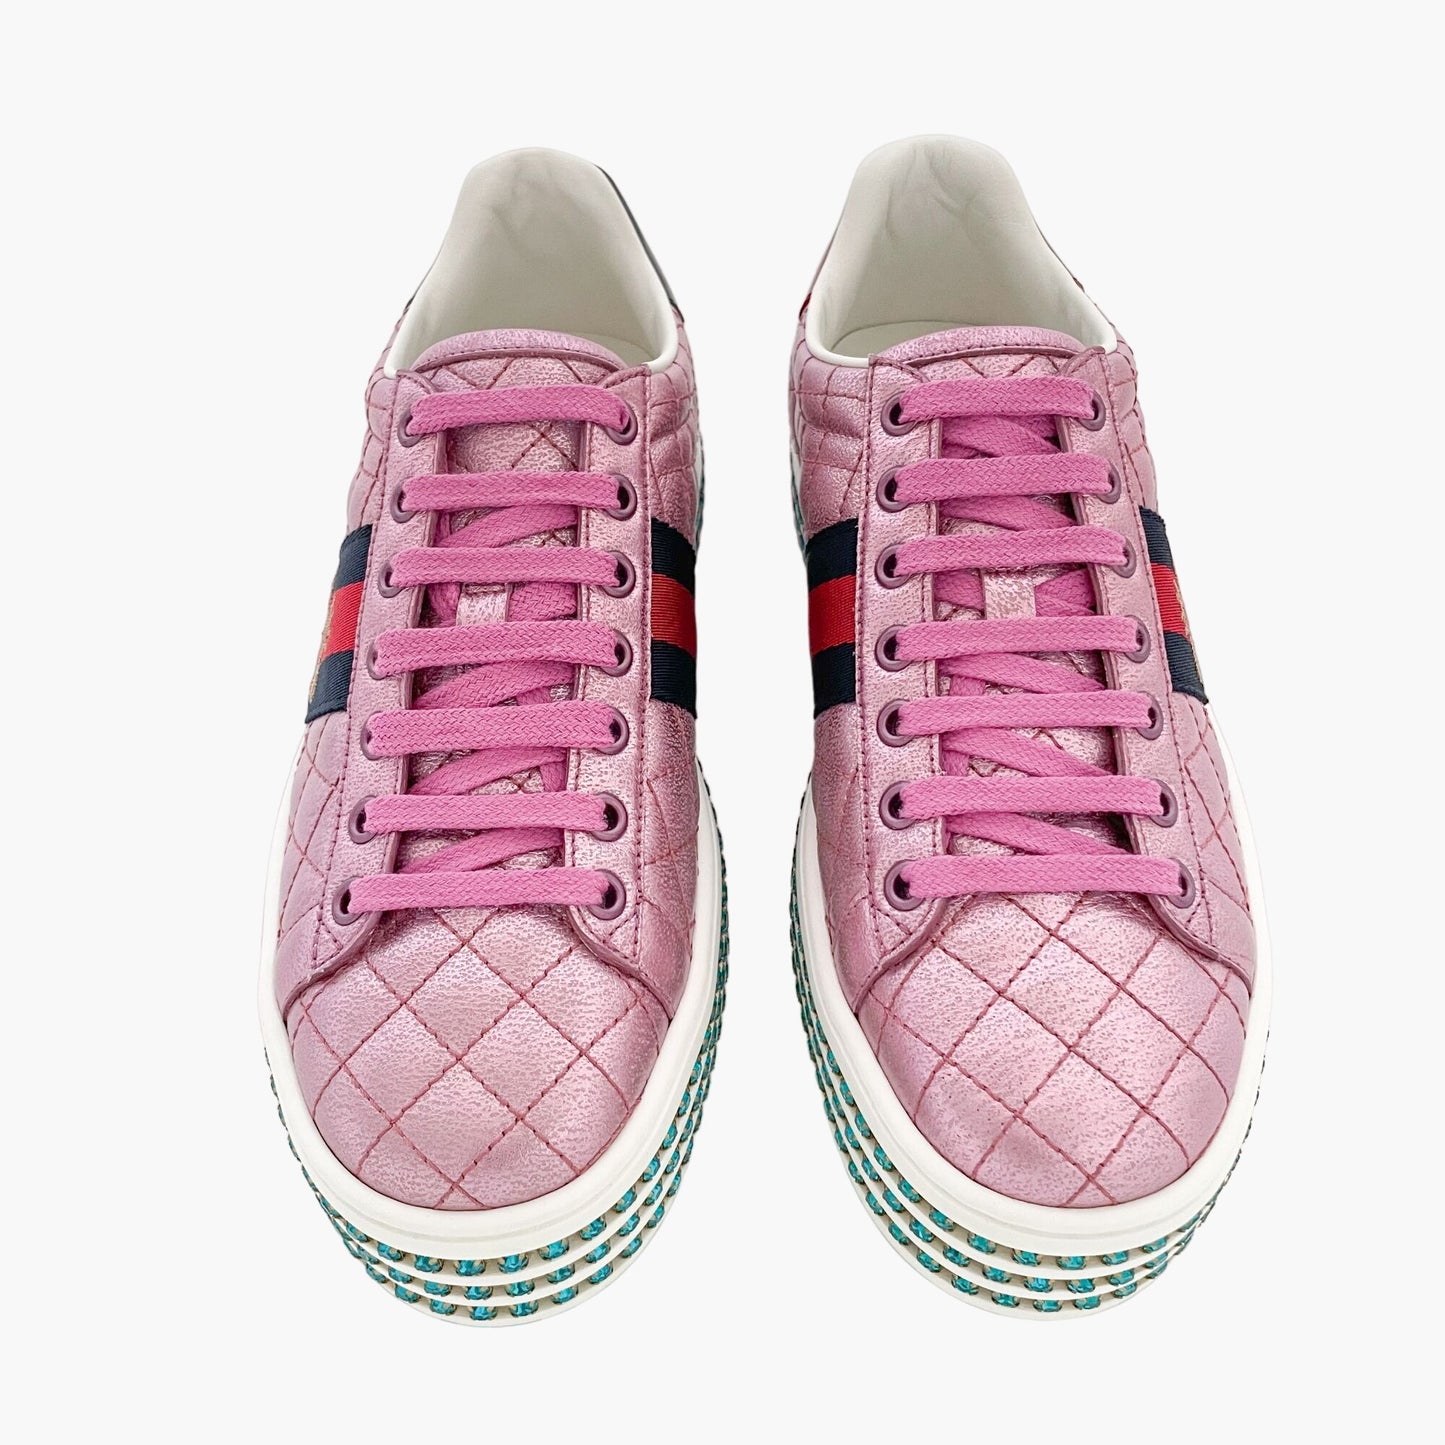 Gucci Ace Platform Sneaker in Purple/Pink Quilted Leather Size 36.5